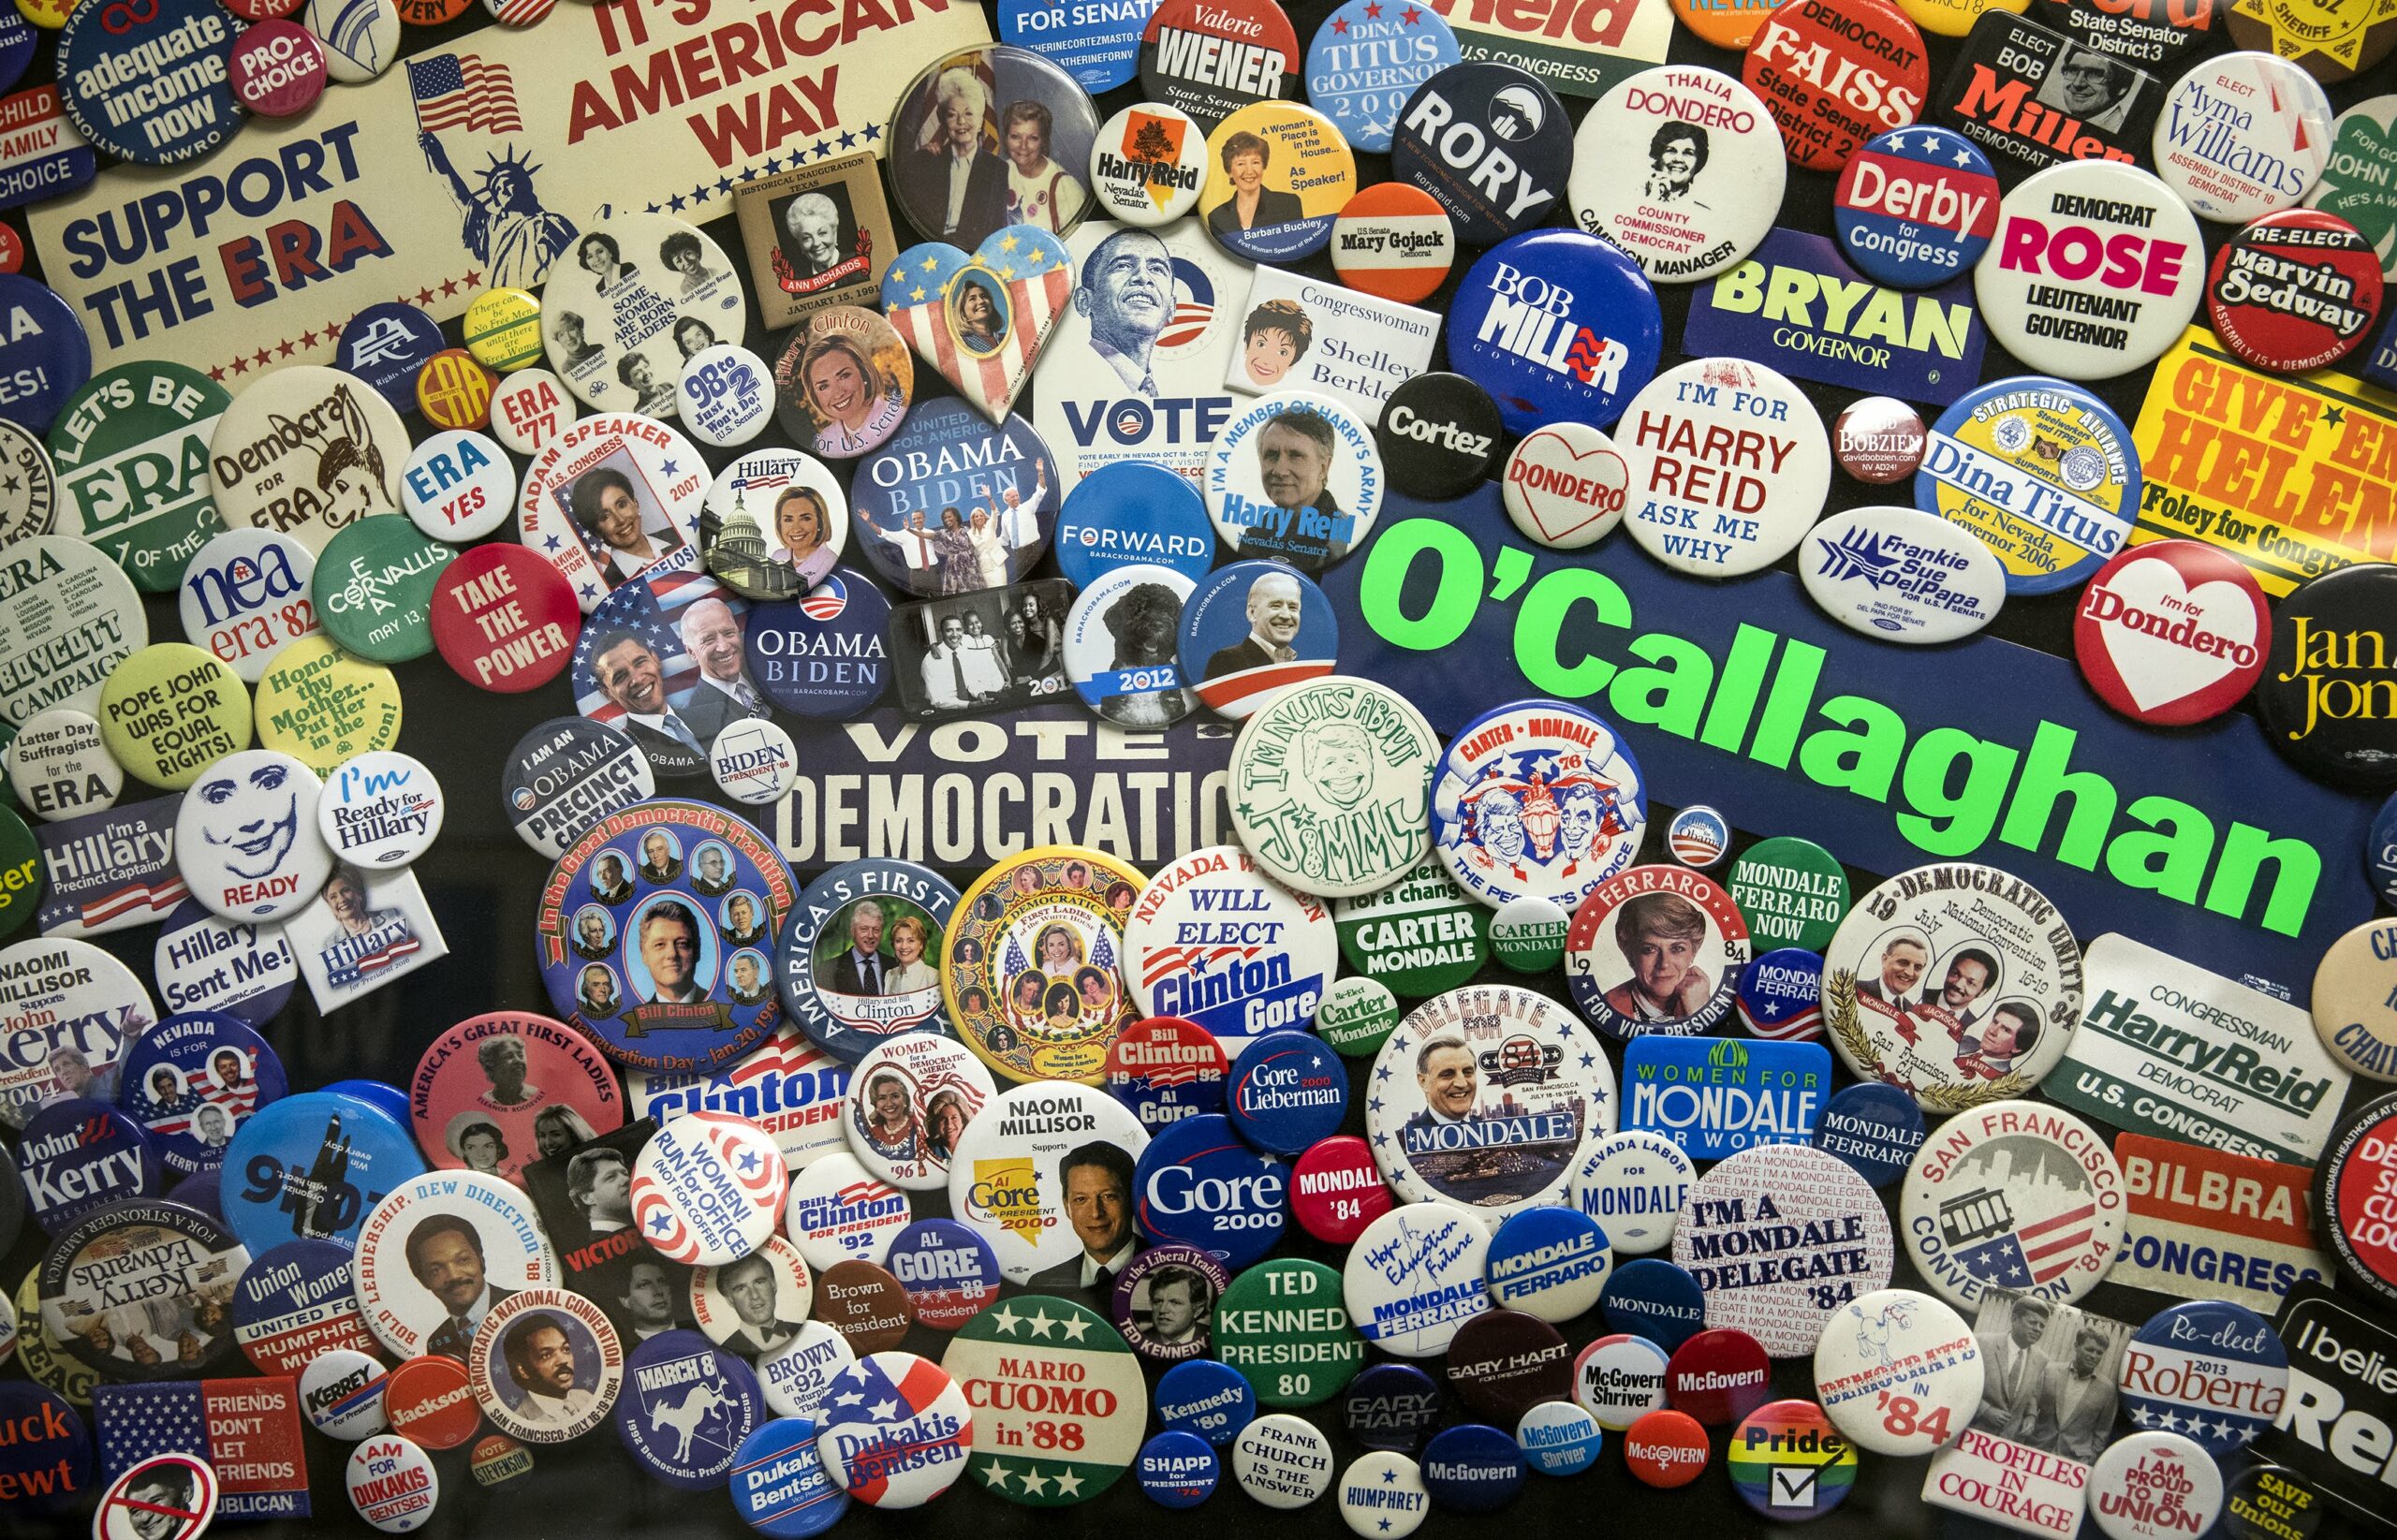 A collection of political buttons